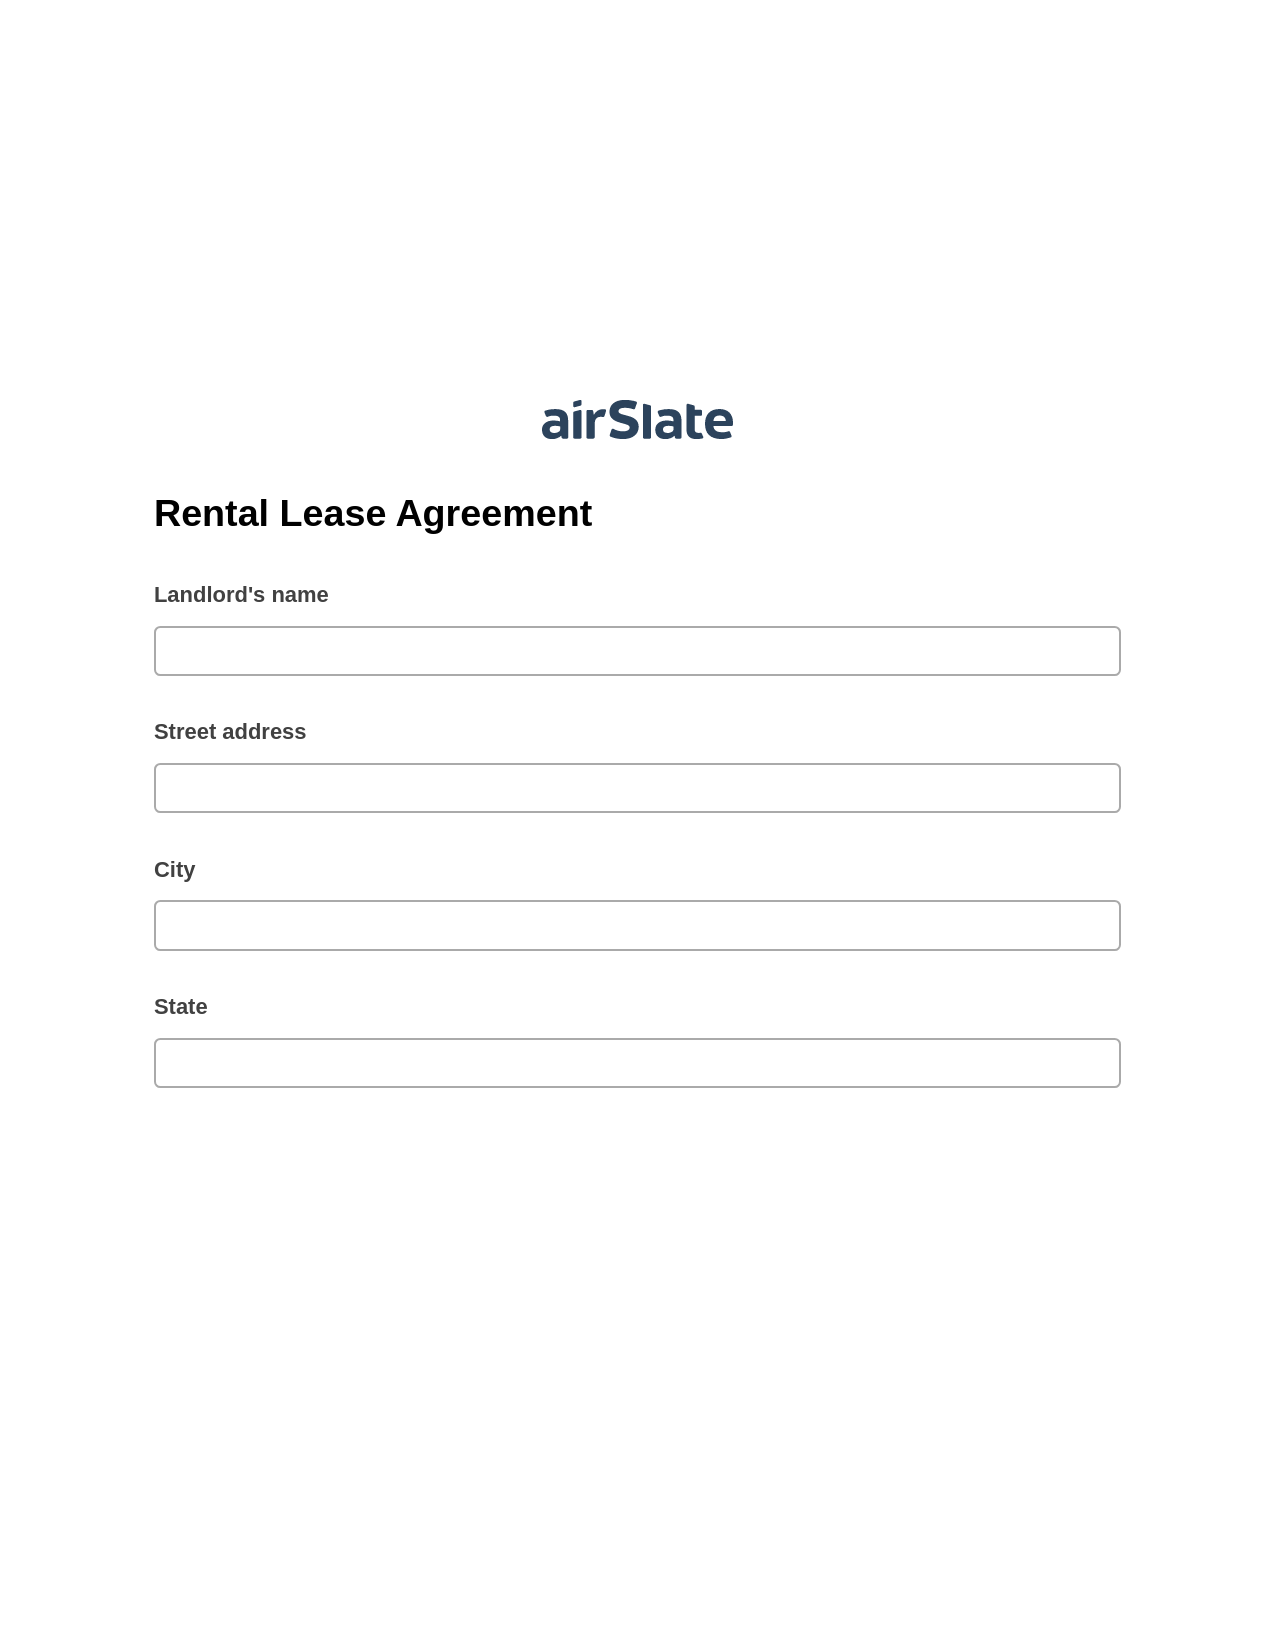 Rental Lease Agreement Pre-fill from Excel Spreadsheet Bot, Remove Tags From Slate Bot, Export to Formstack Documents Bot